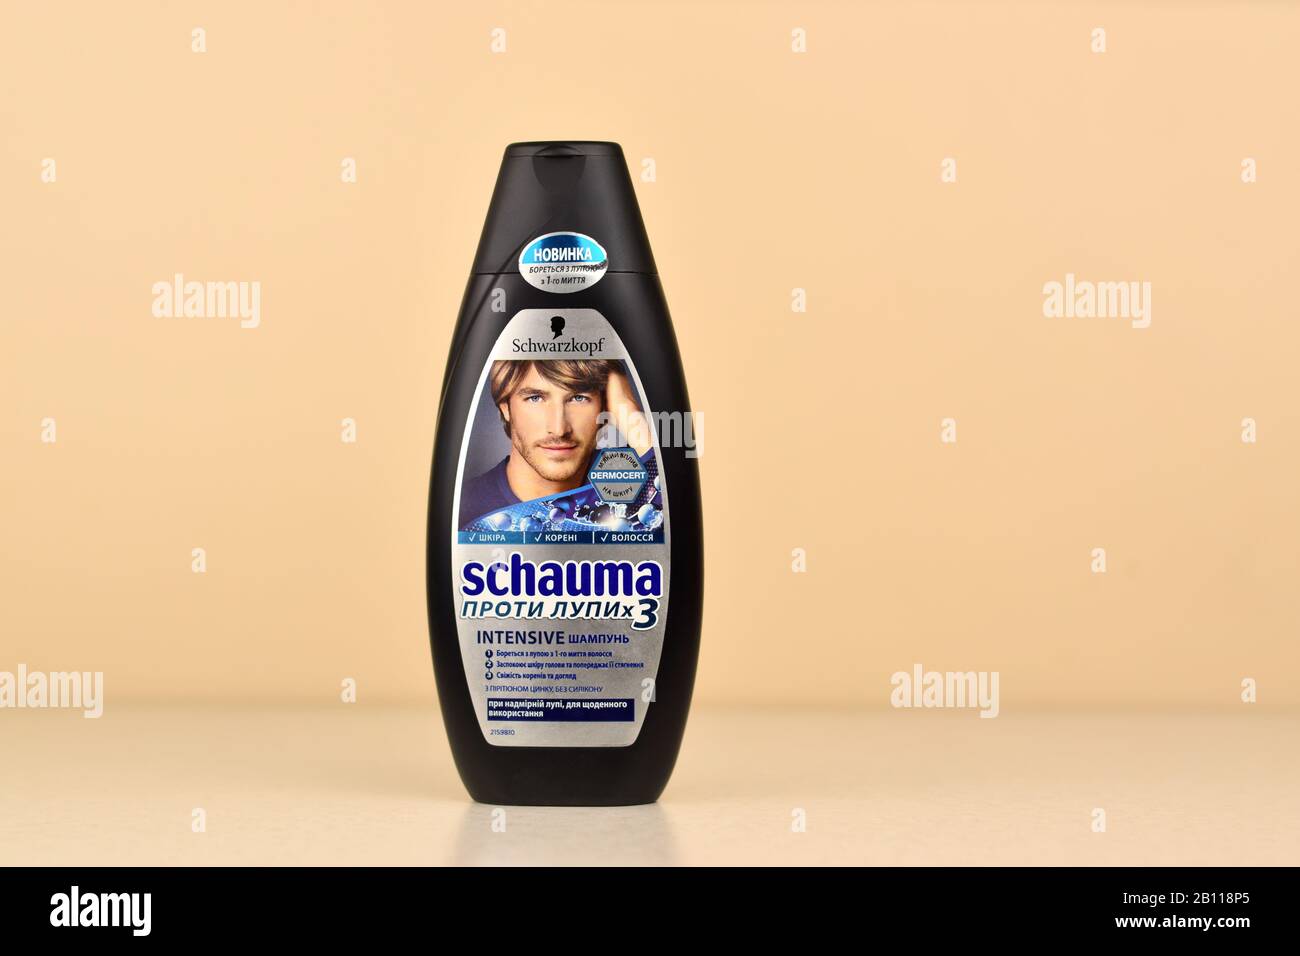 Schwarzkopf Shampoo High Resolution Stock Photography and Images - Alamy